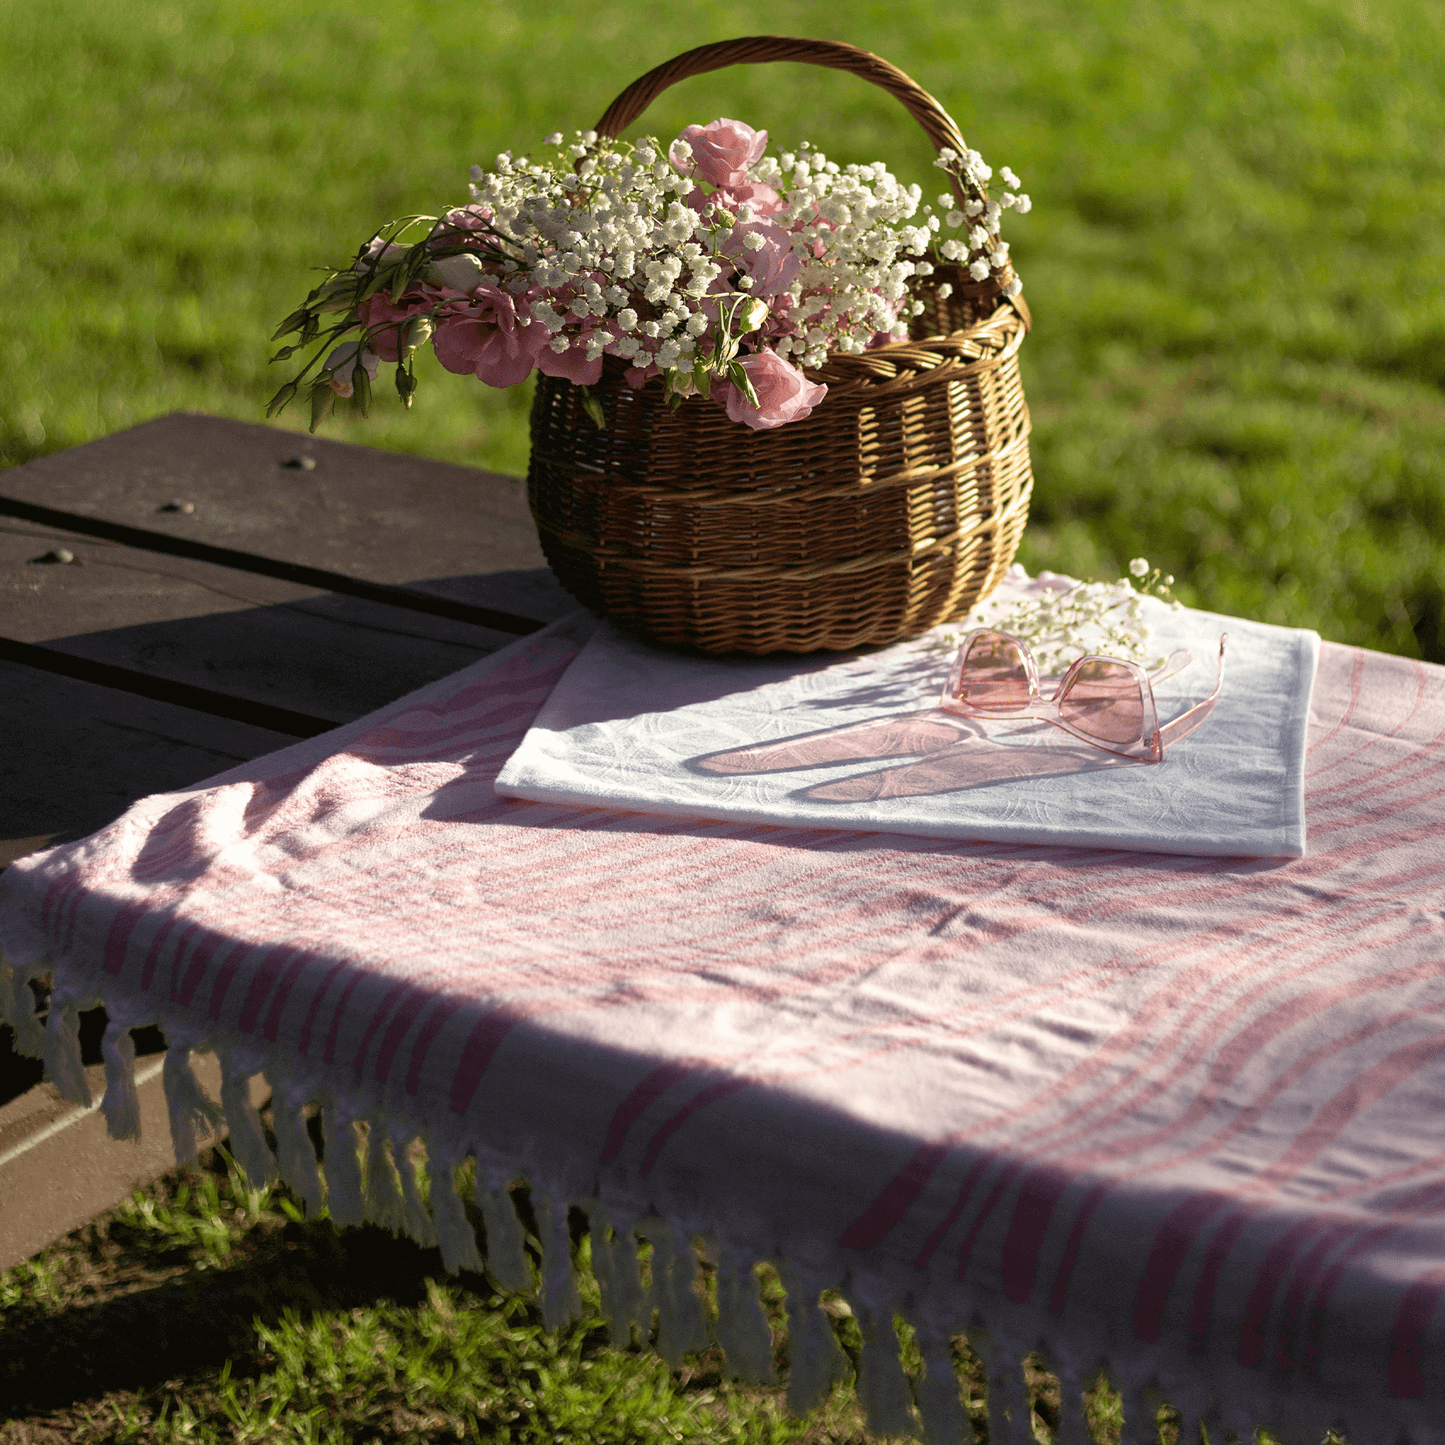 Pink Turkish towel as a summer picnic tablecloth